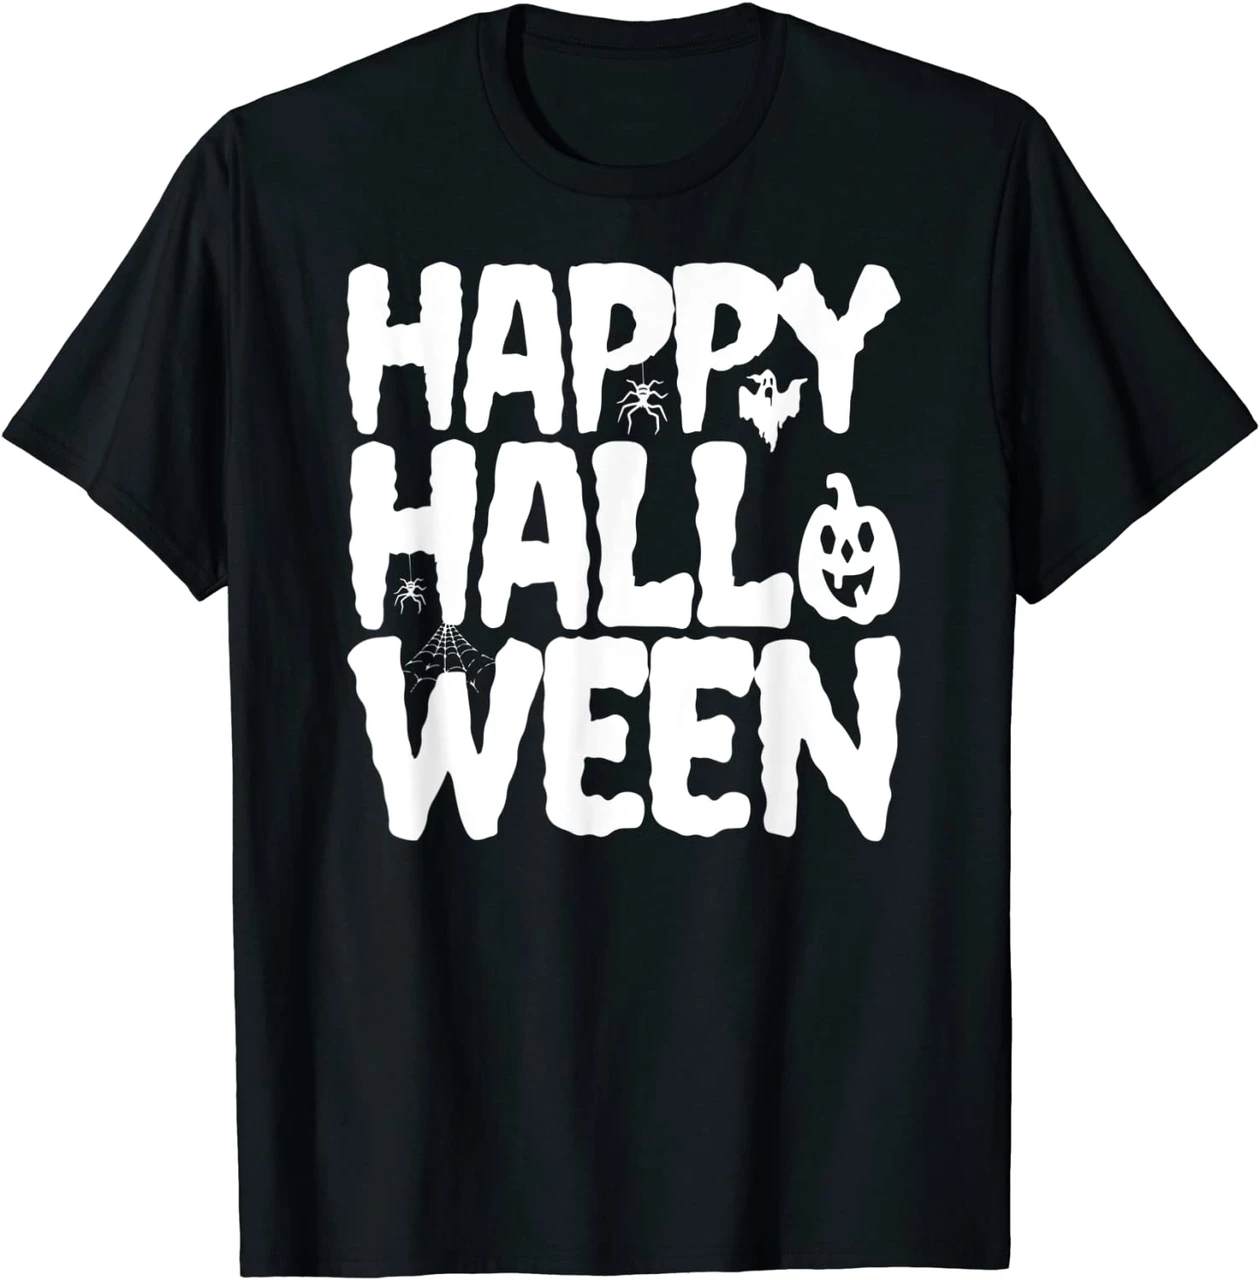 Happy Halloween With Spiders, Ghosts And Funny Pumpkins Shirt